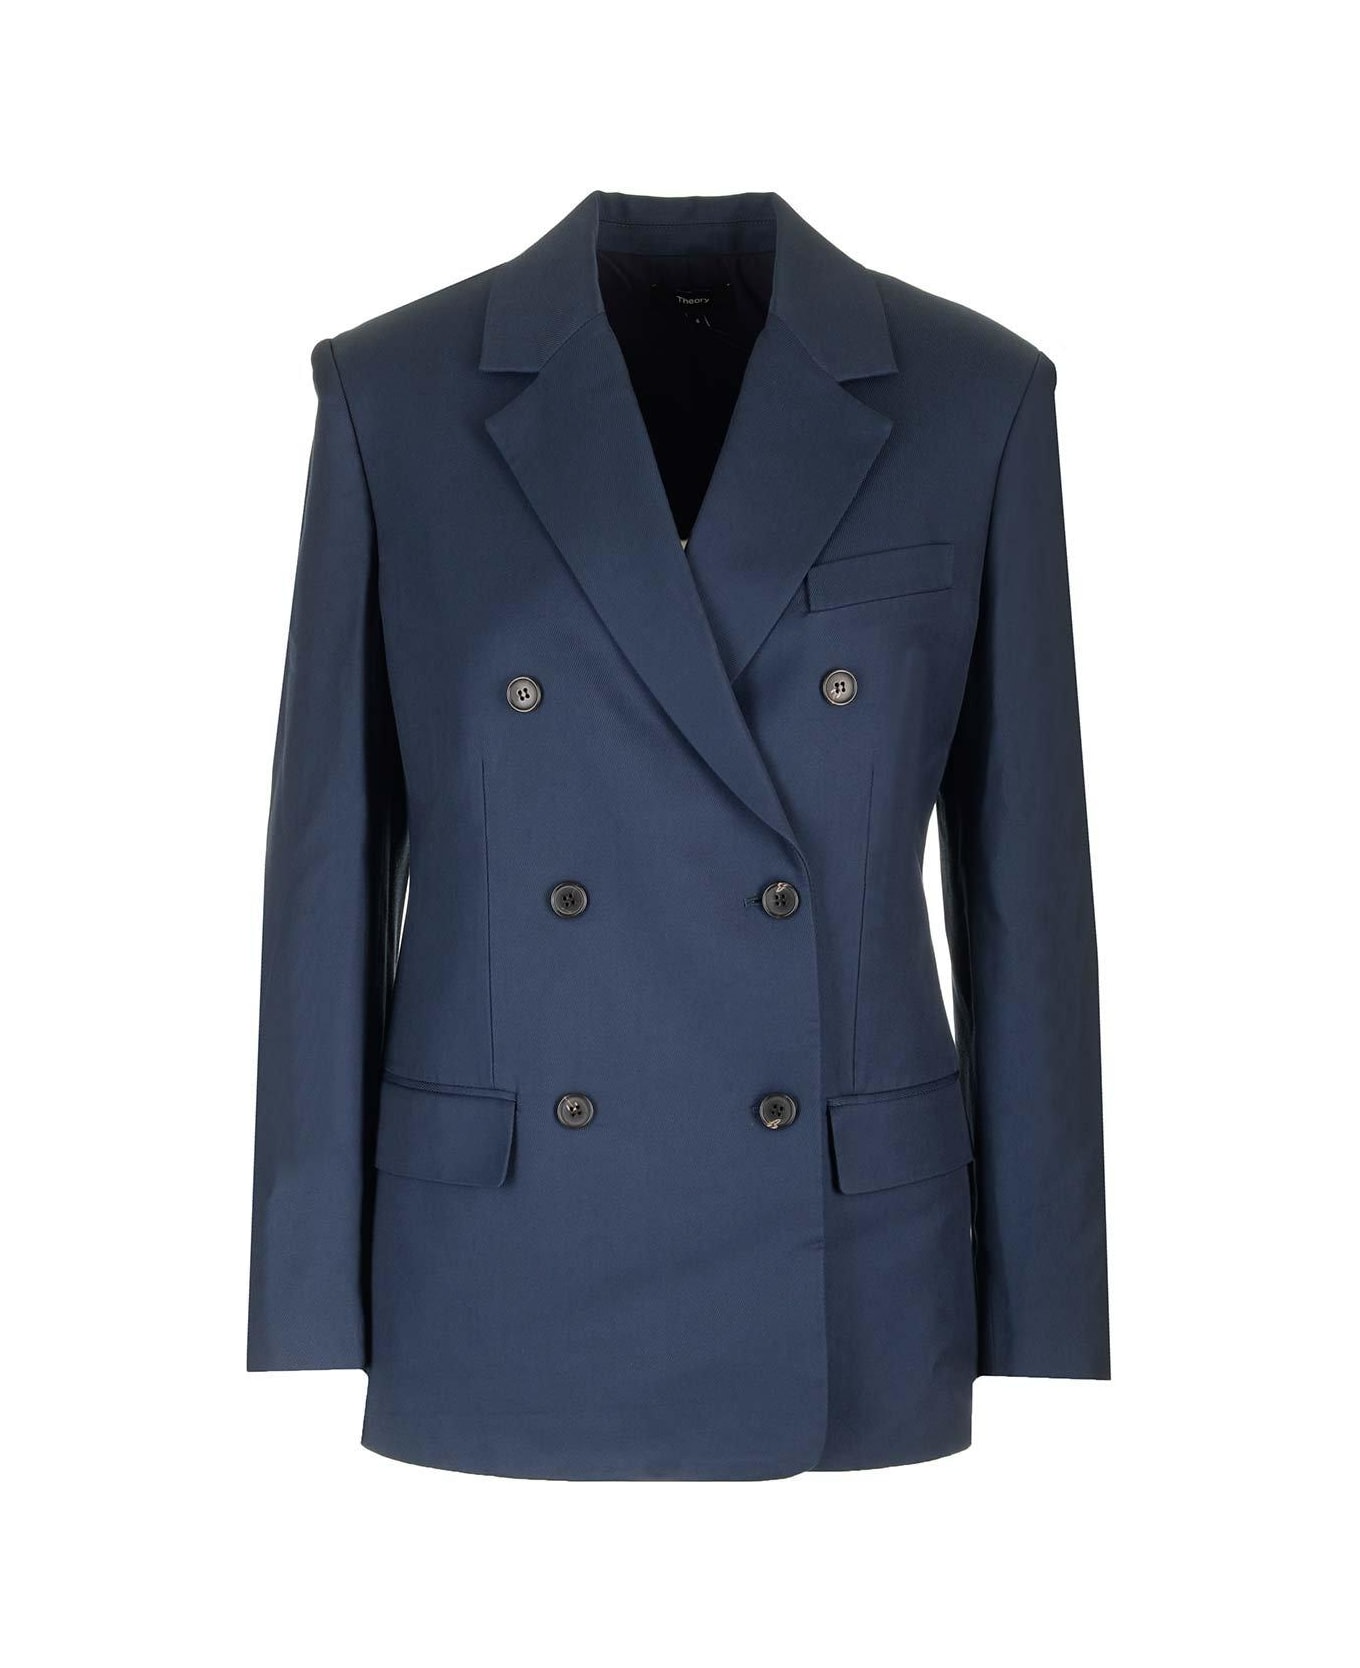 Theory Double-breasted Blazer - Xlv Nocturne Navy